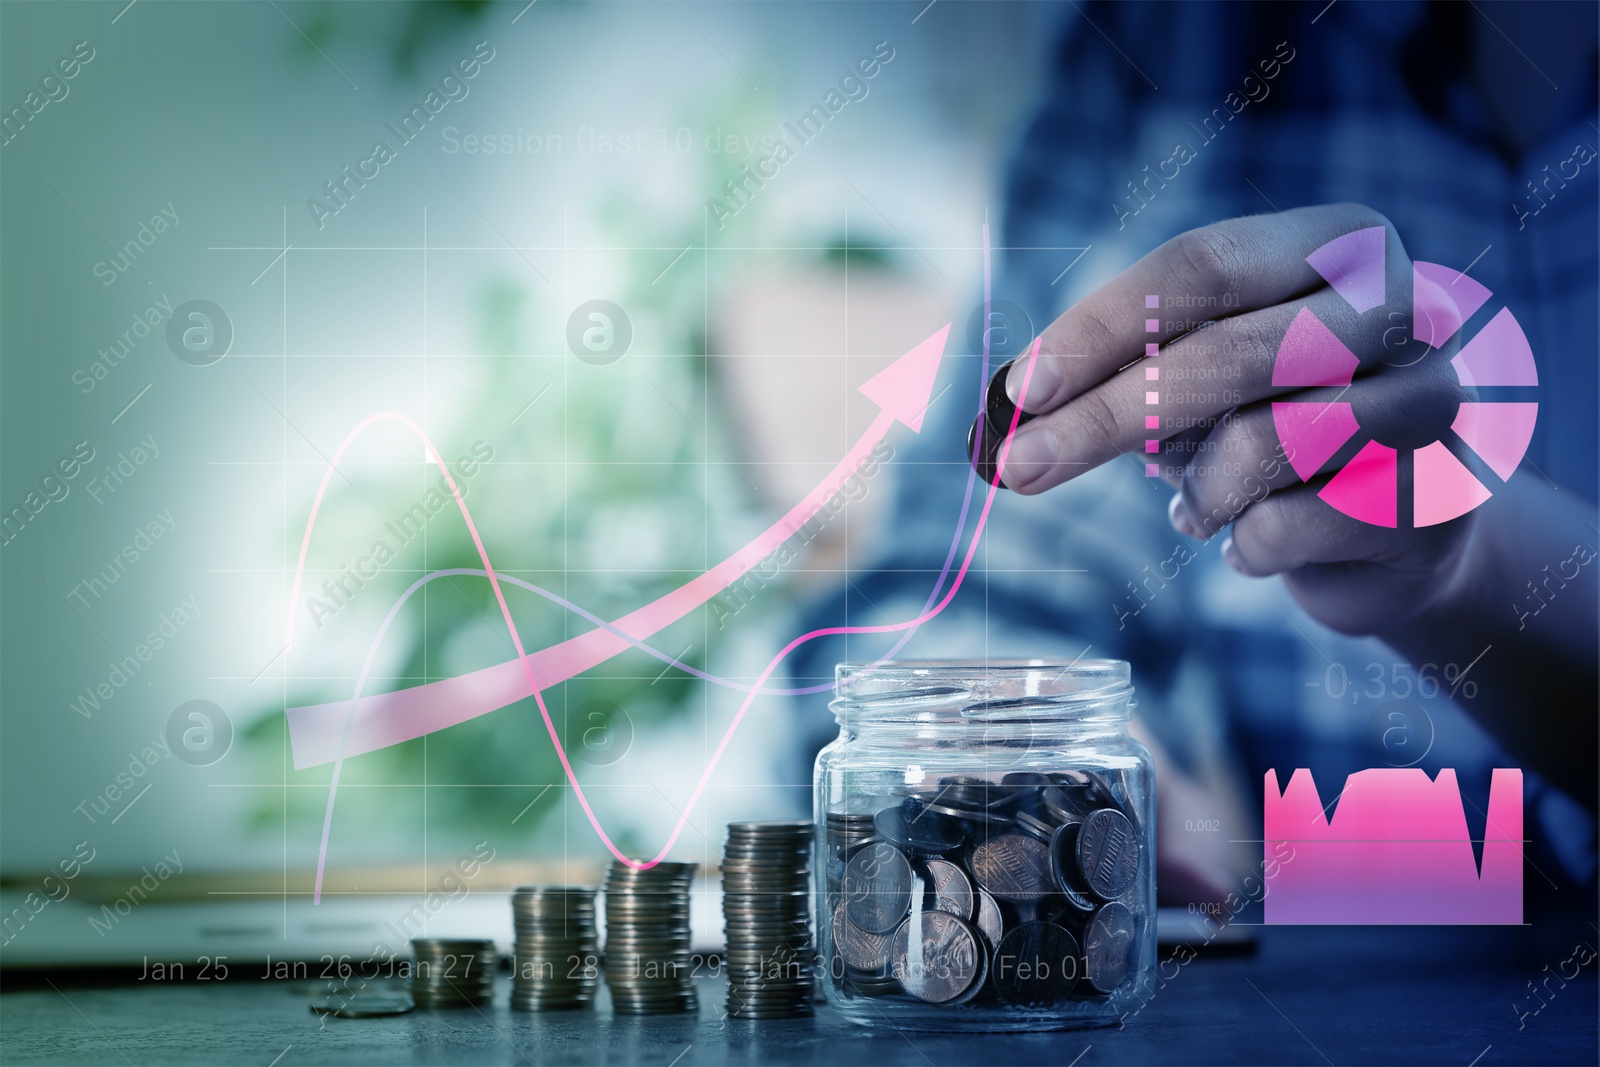 Image of Forex trading. Woman putting money into glass jar at table and charts, closeup